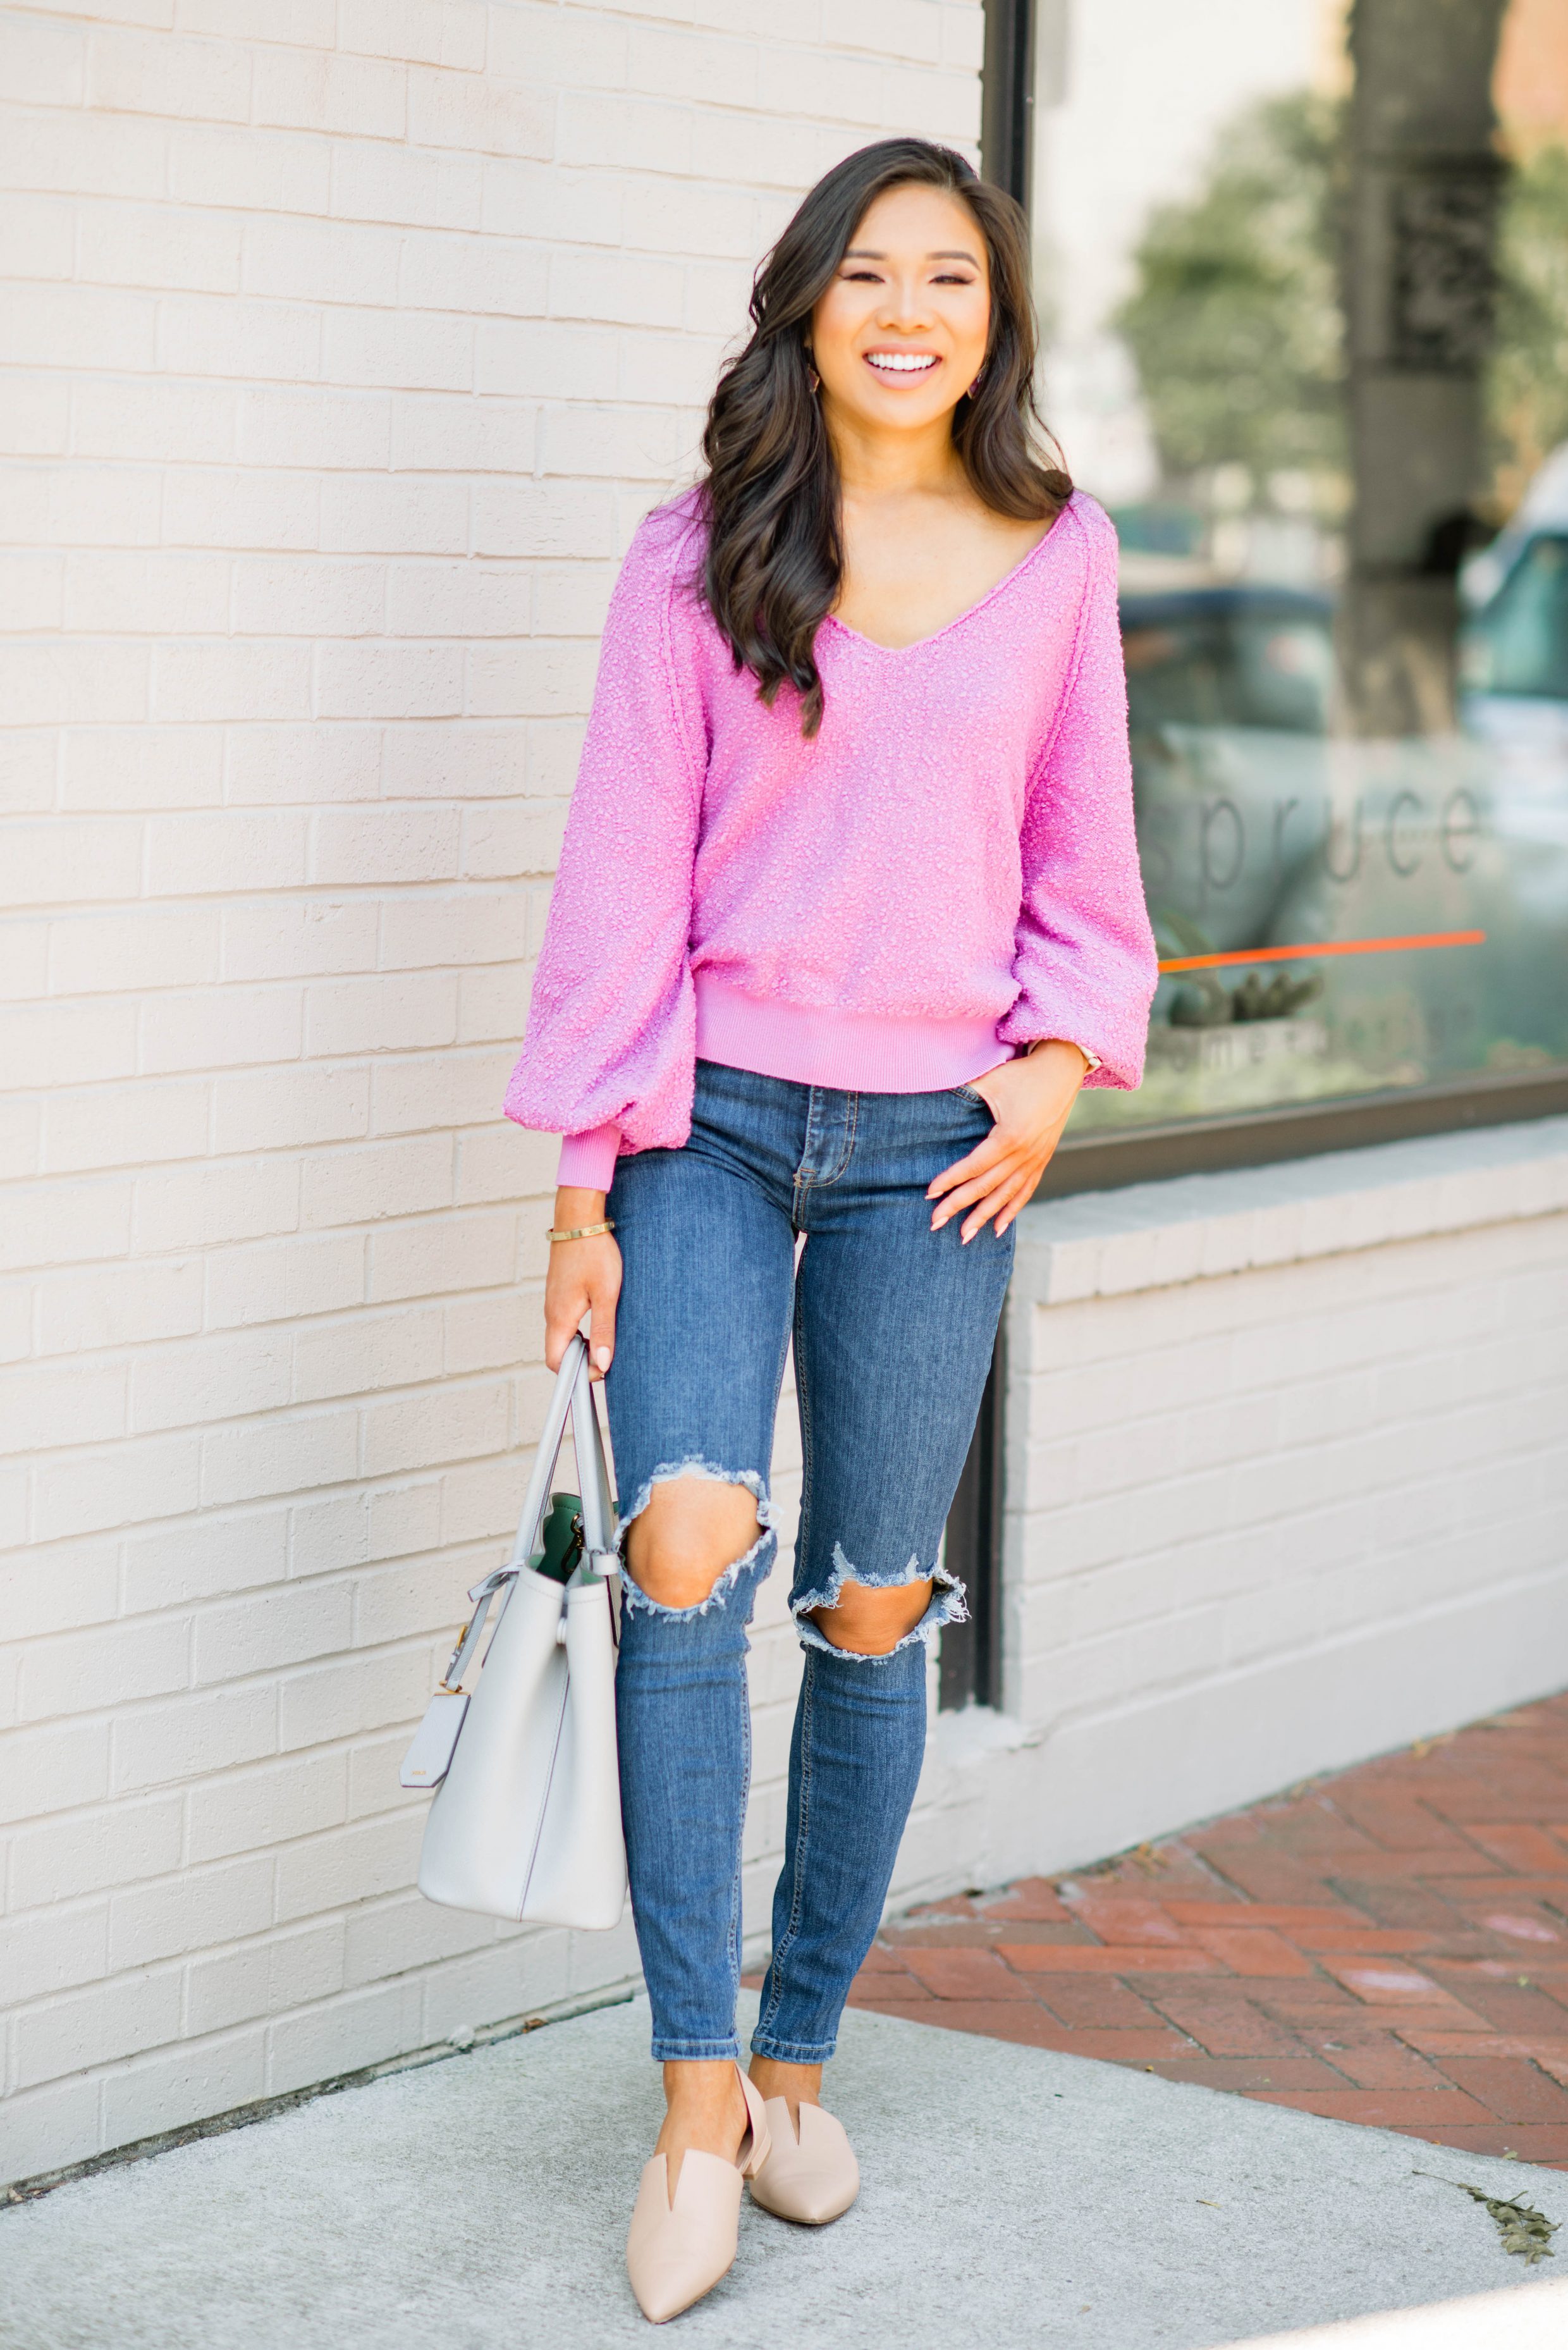 Nordstrom Anniversary Sale 2018 Finds :: Balloon Sleeve Sweater & Jeans for  $52 - Color & Chic